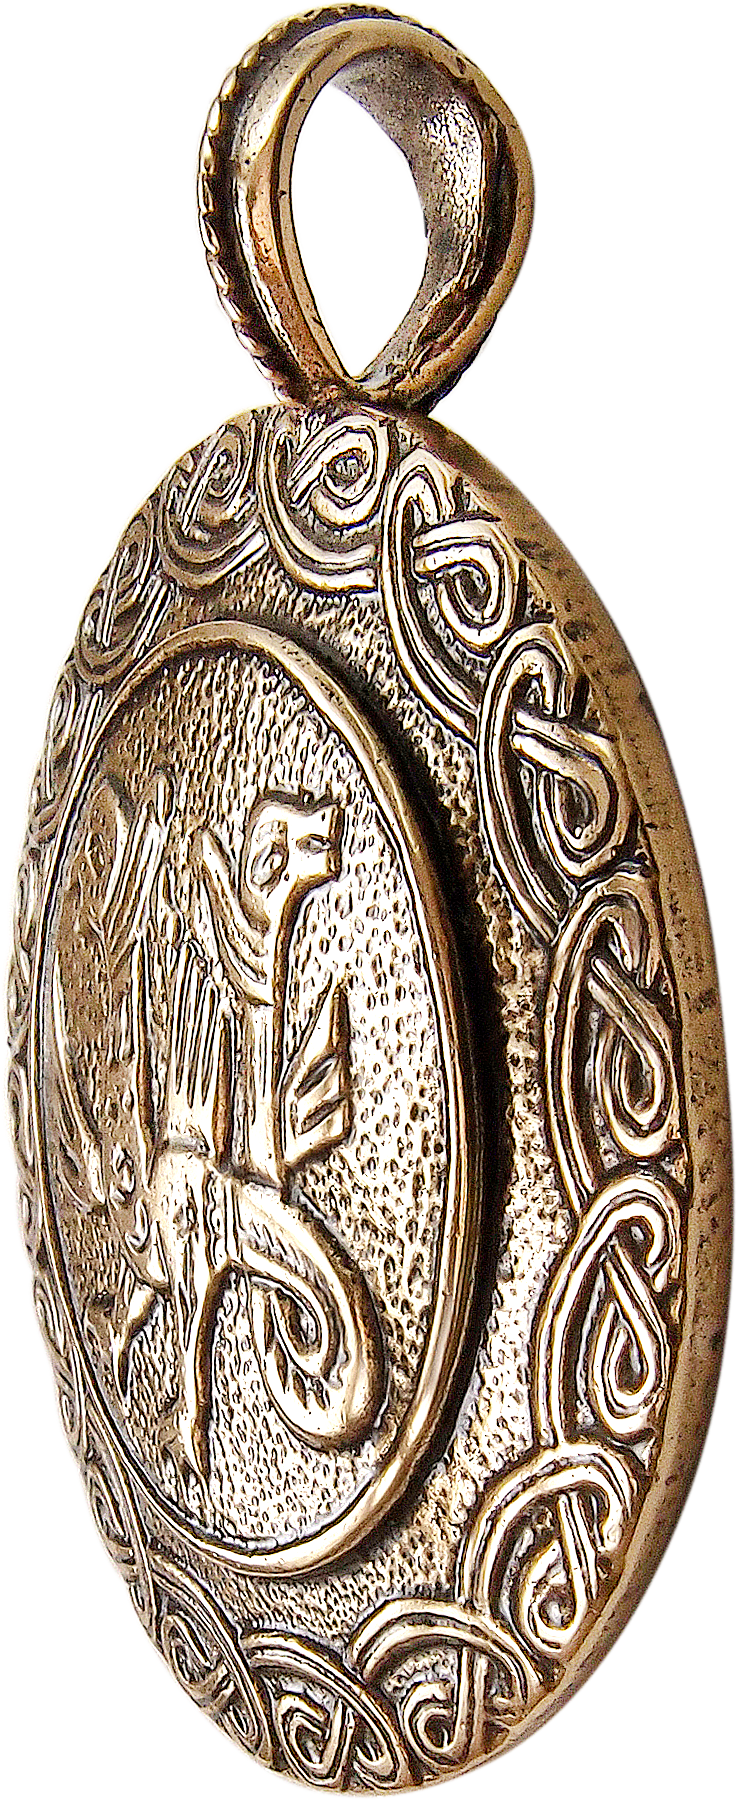 Pendant "Two-headed griffin"